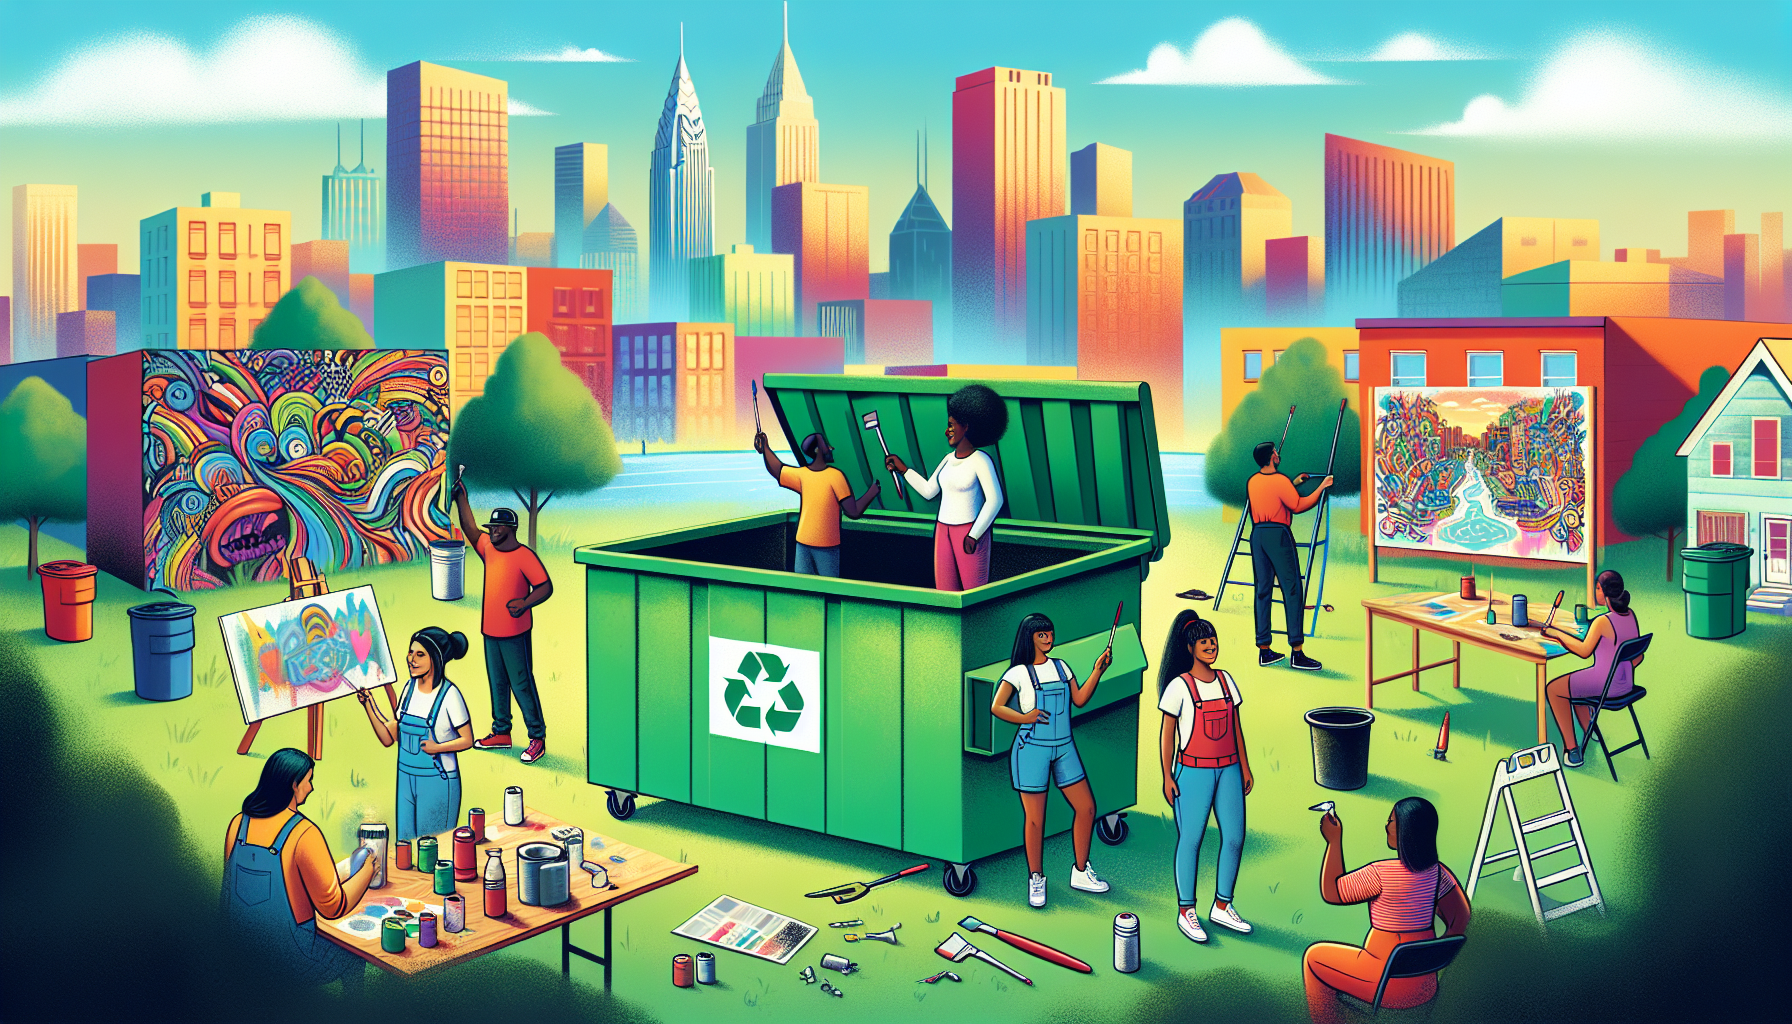 Dumpster rental for community projects in North Carolina